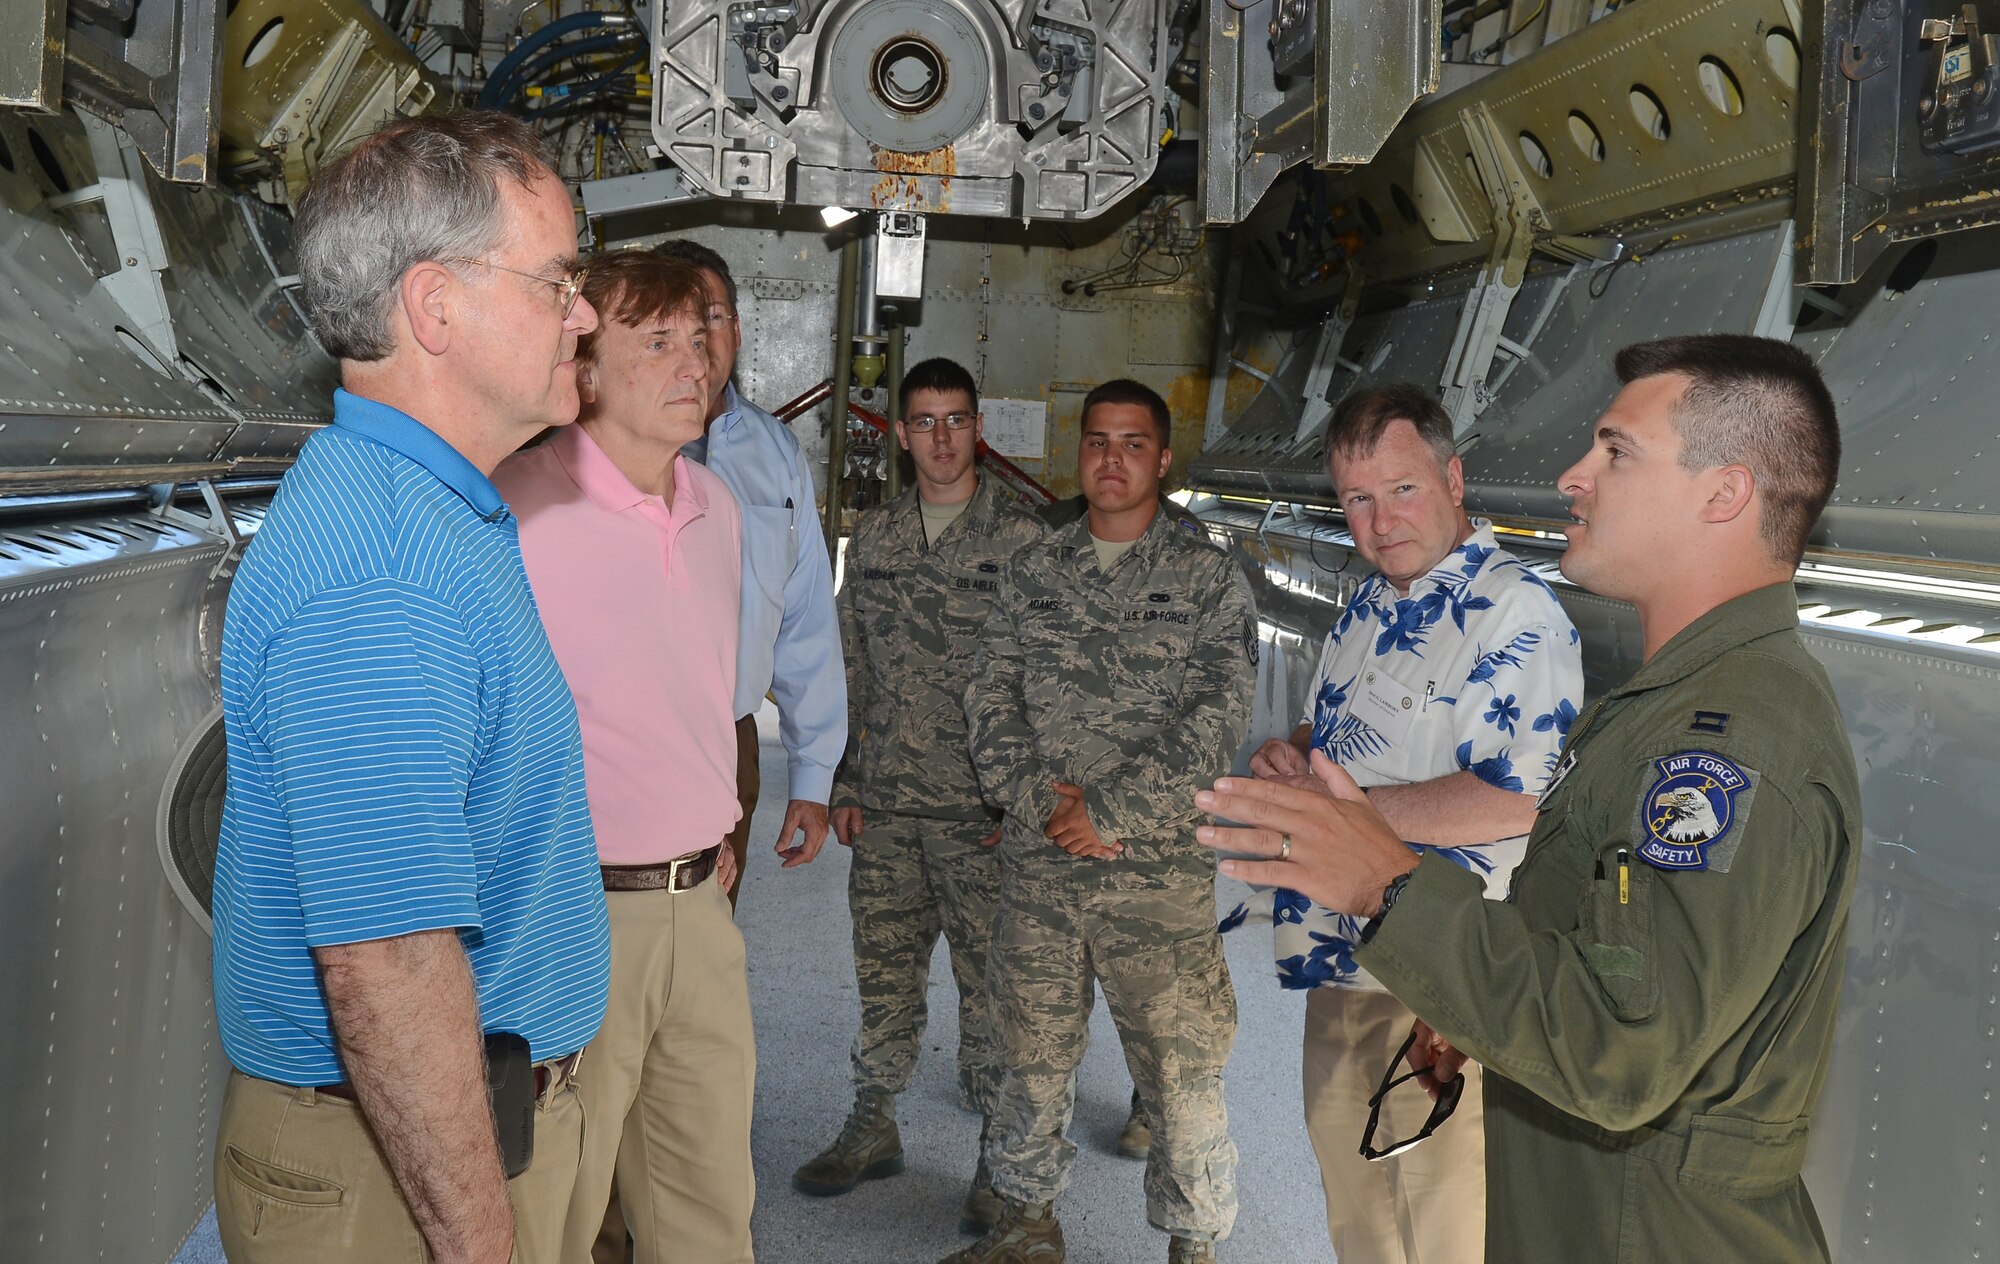 Capt. Alexander Barwikowski (right), B-52 Stratofortress weapons system officer with the 20th Expeditionary Bomb Squadron, guides representatives with the House Armed Services Committee during a tour of the aircraft’s bomb bay, May 24, 2015, at Andersen Air Force Base, Guam. Congress members visited the bases to gain a better understanding of current rebalance efforts in the Pacific region. (U.S. Air Force photo by Senior Airman Alexander W. Riedel/Released)